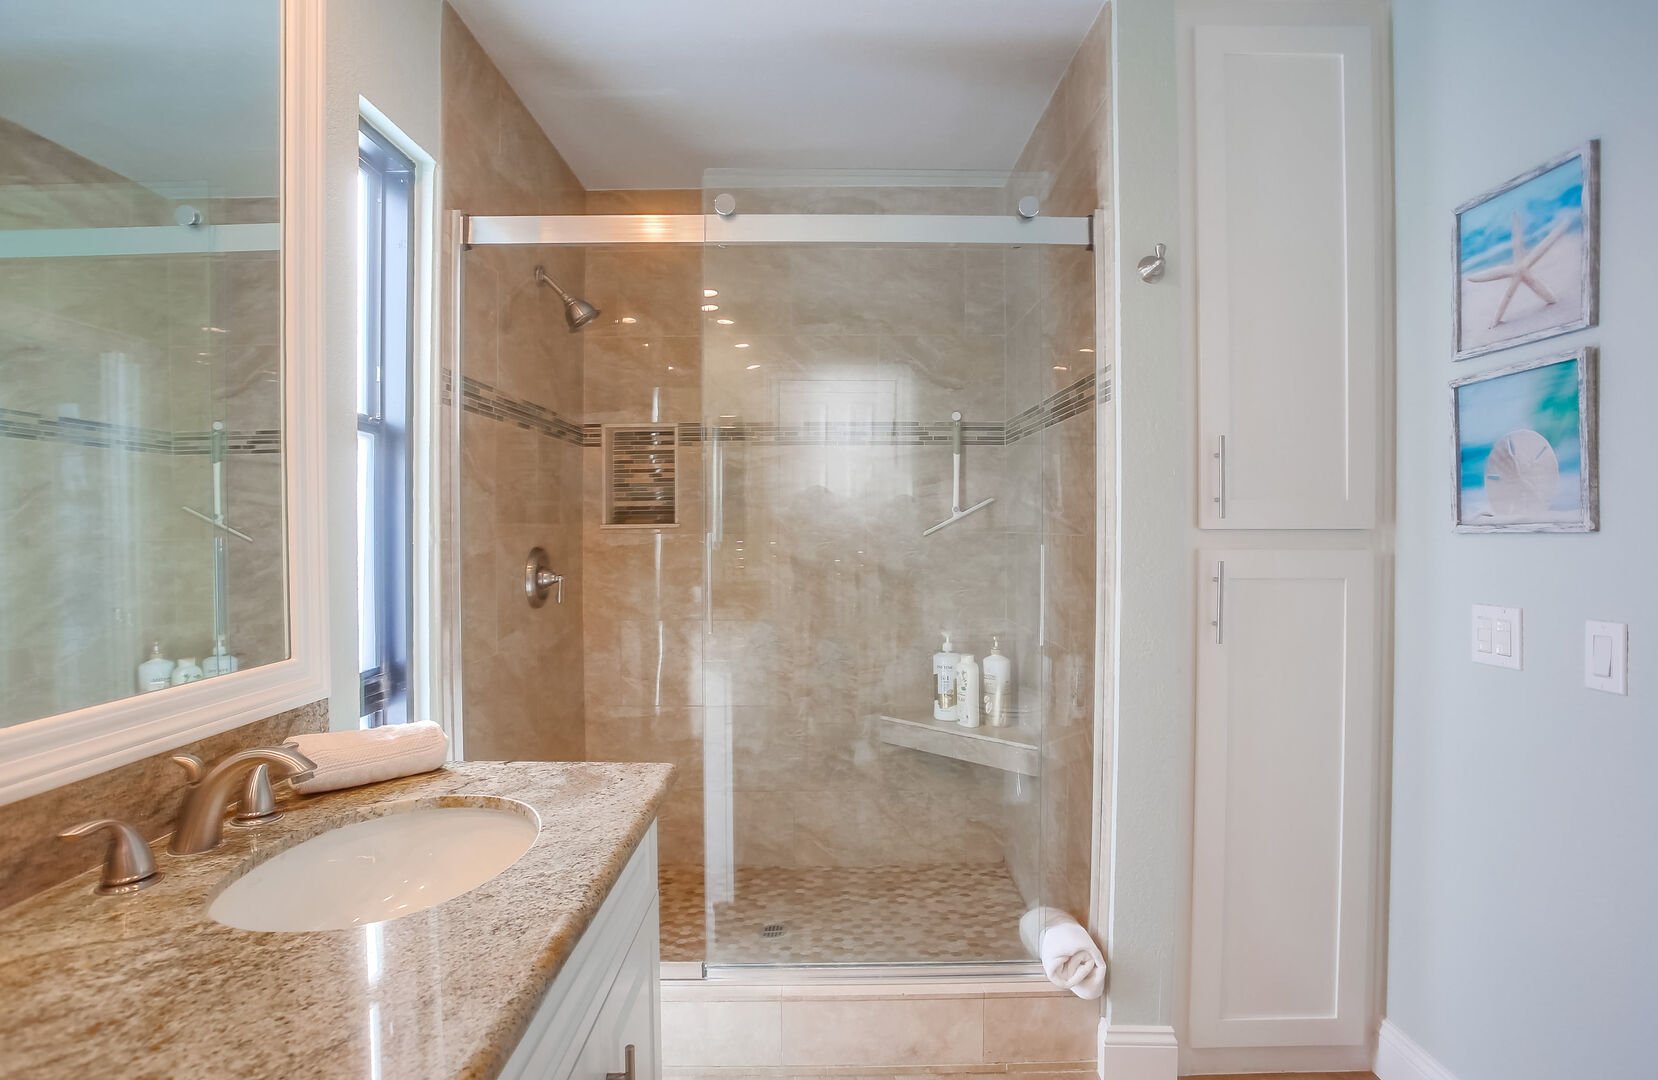 In-suite and shared bathroom with all new walk-in shower, dual vanity, countertops, cabinets, flooring and light fixtures!